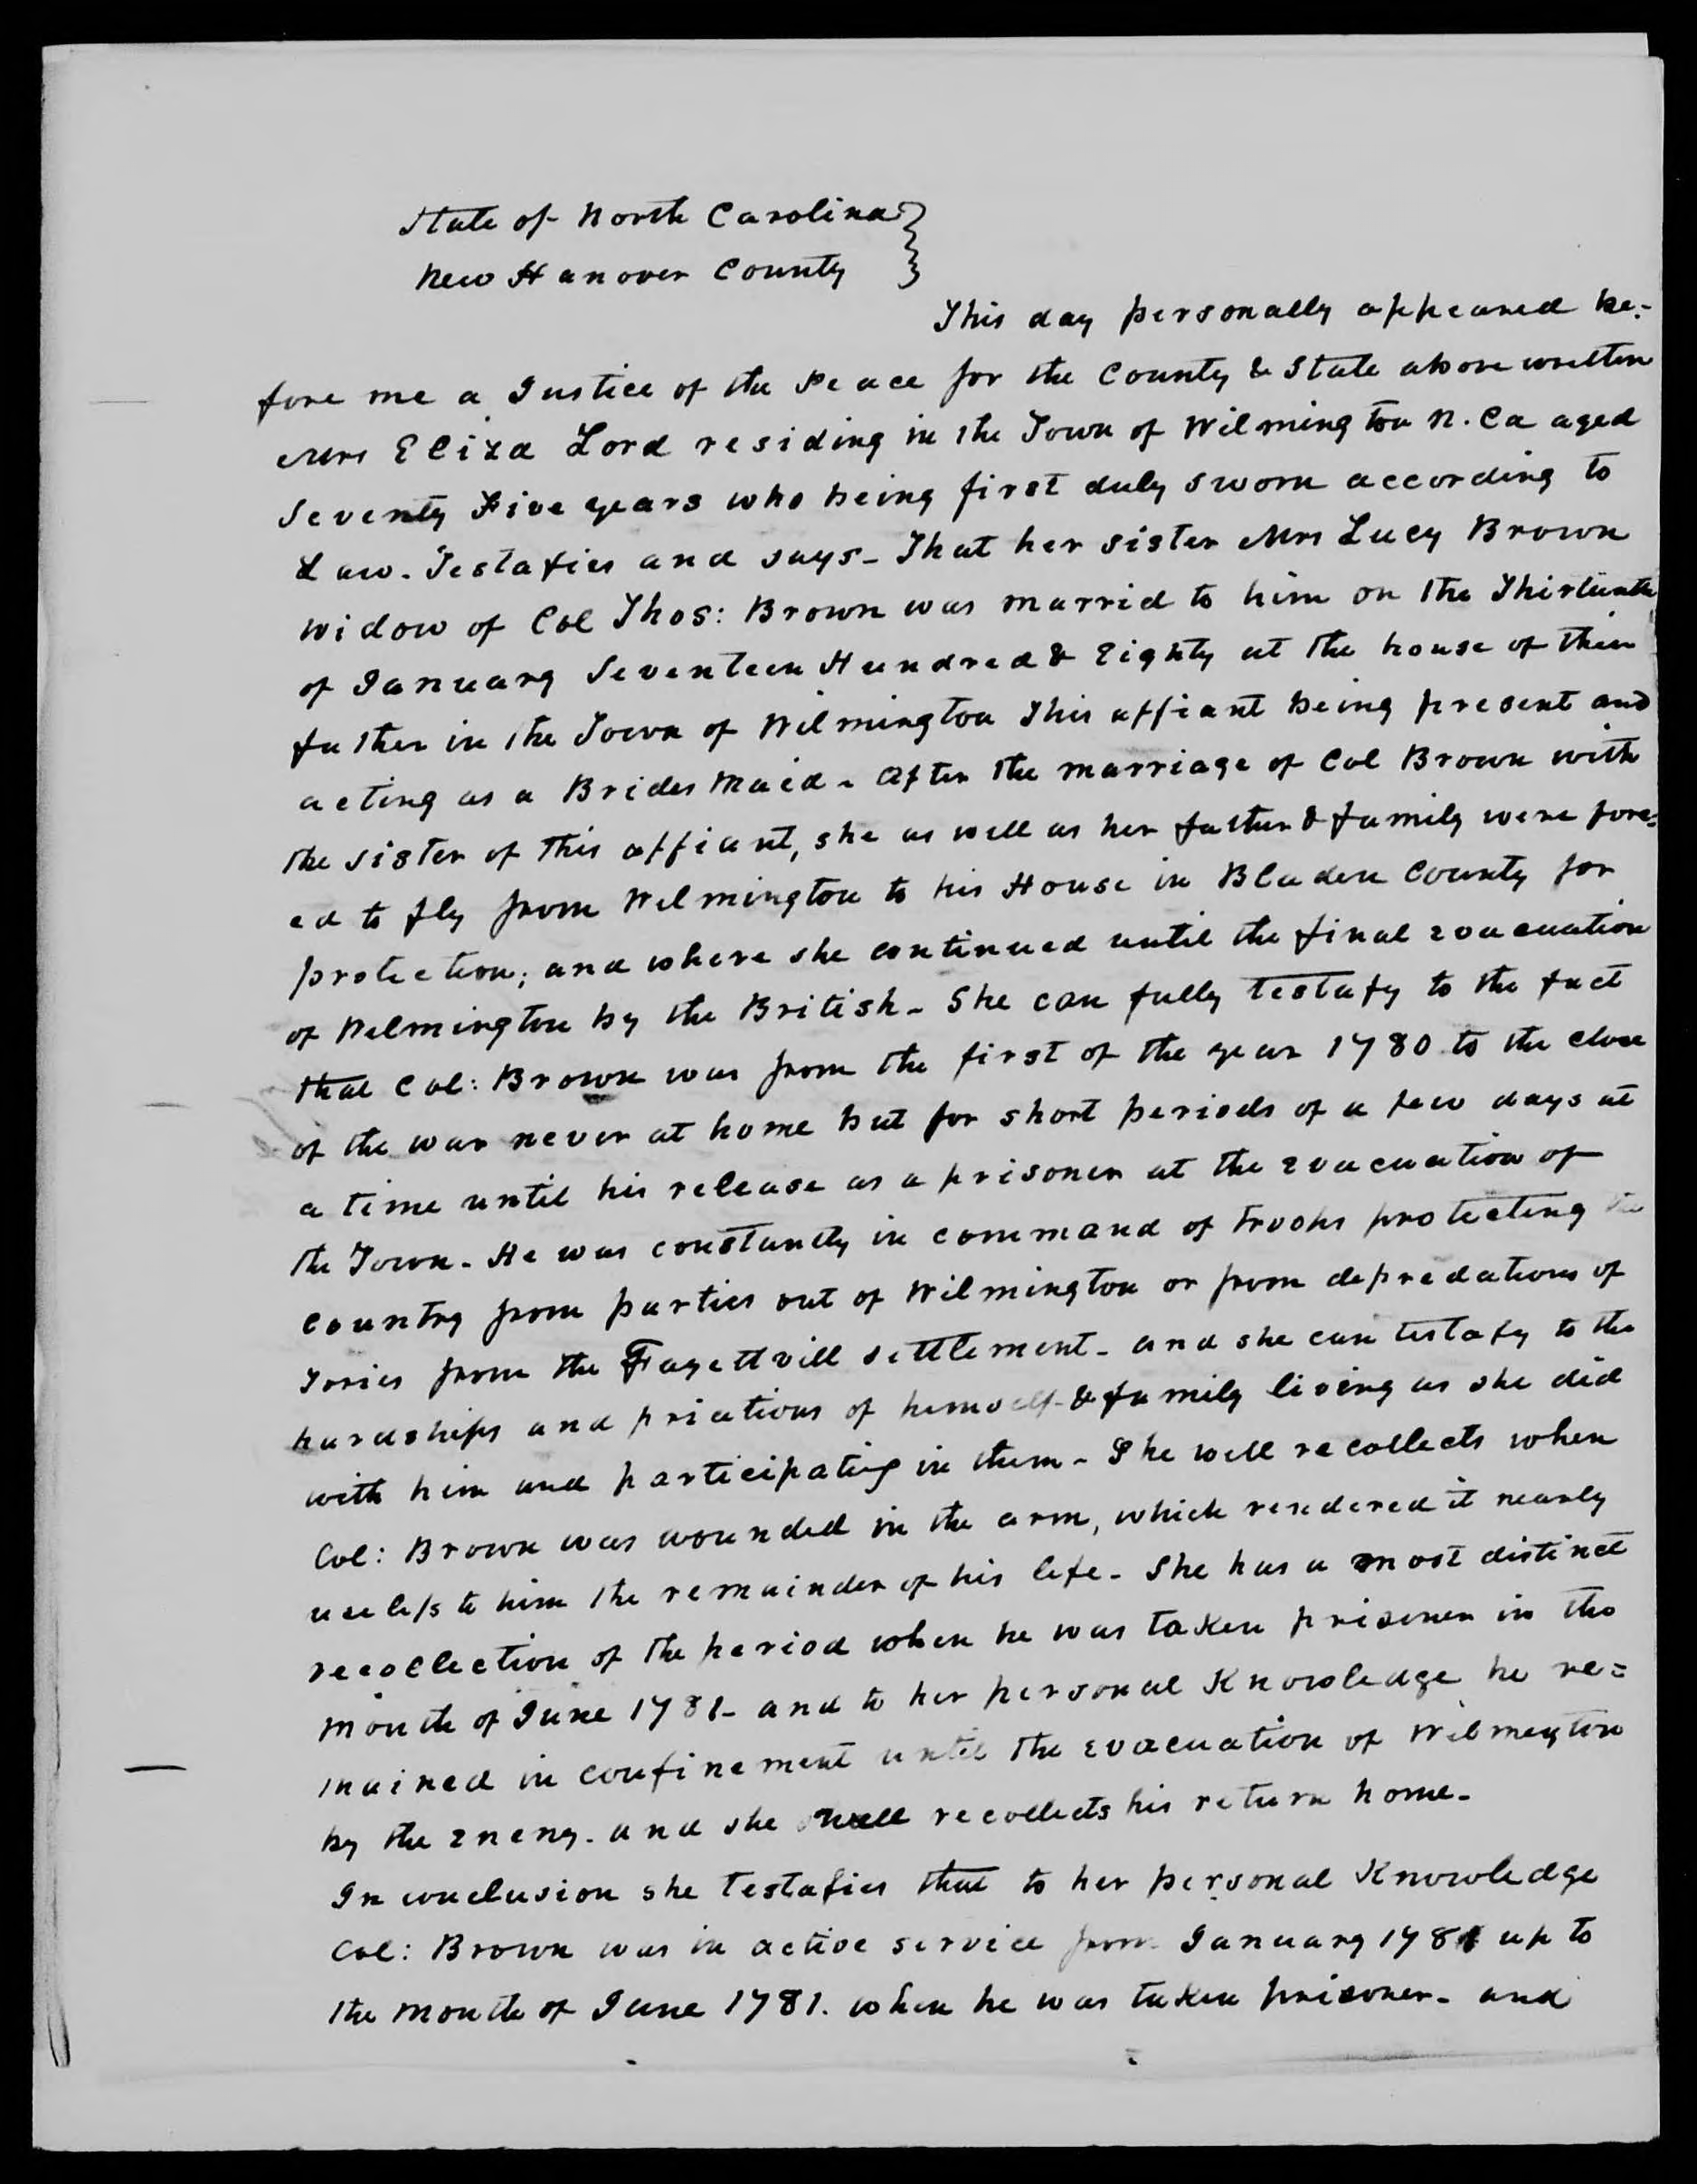 Affidavit of Eliza Lord in support of a Pension Claim for Lucy Brown, 4 April 1839, page 1